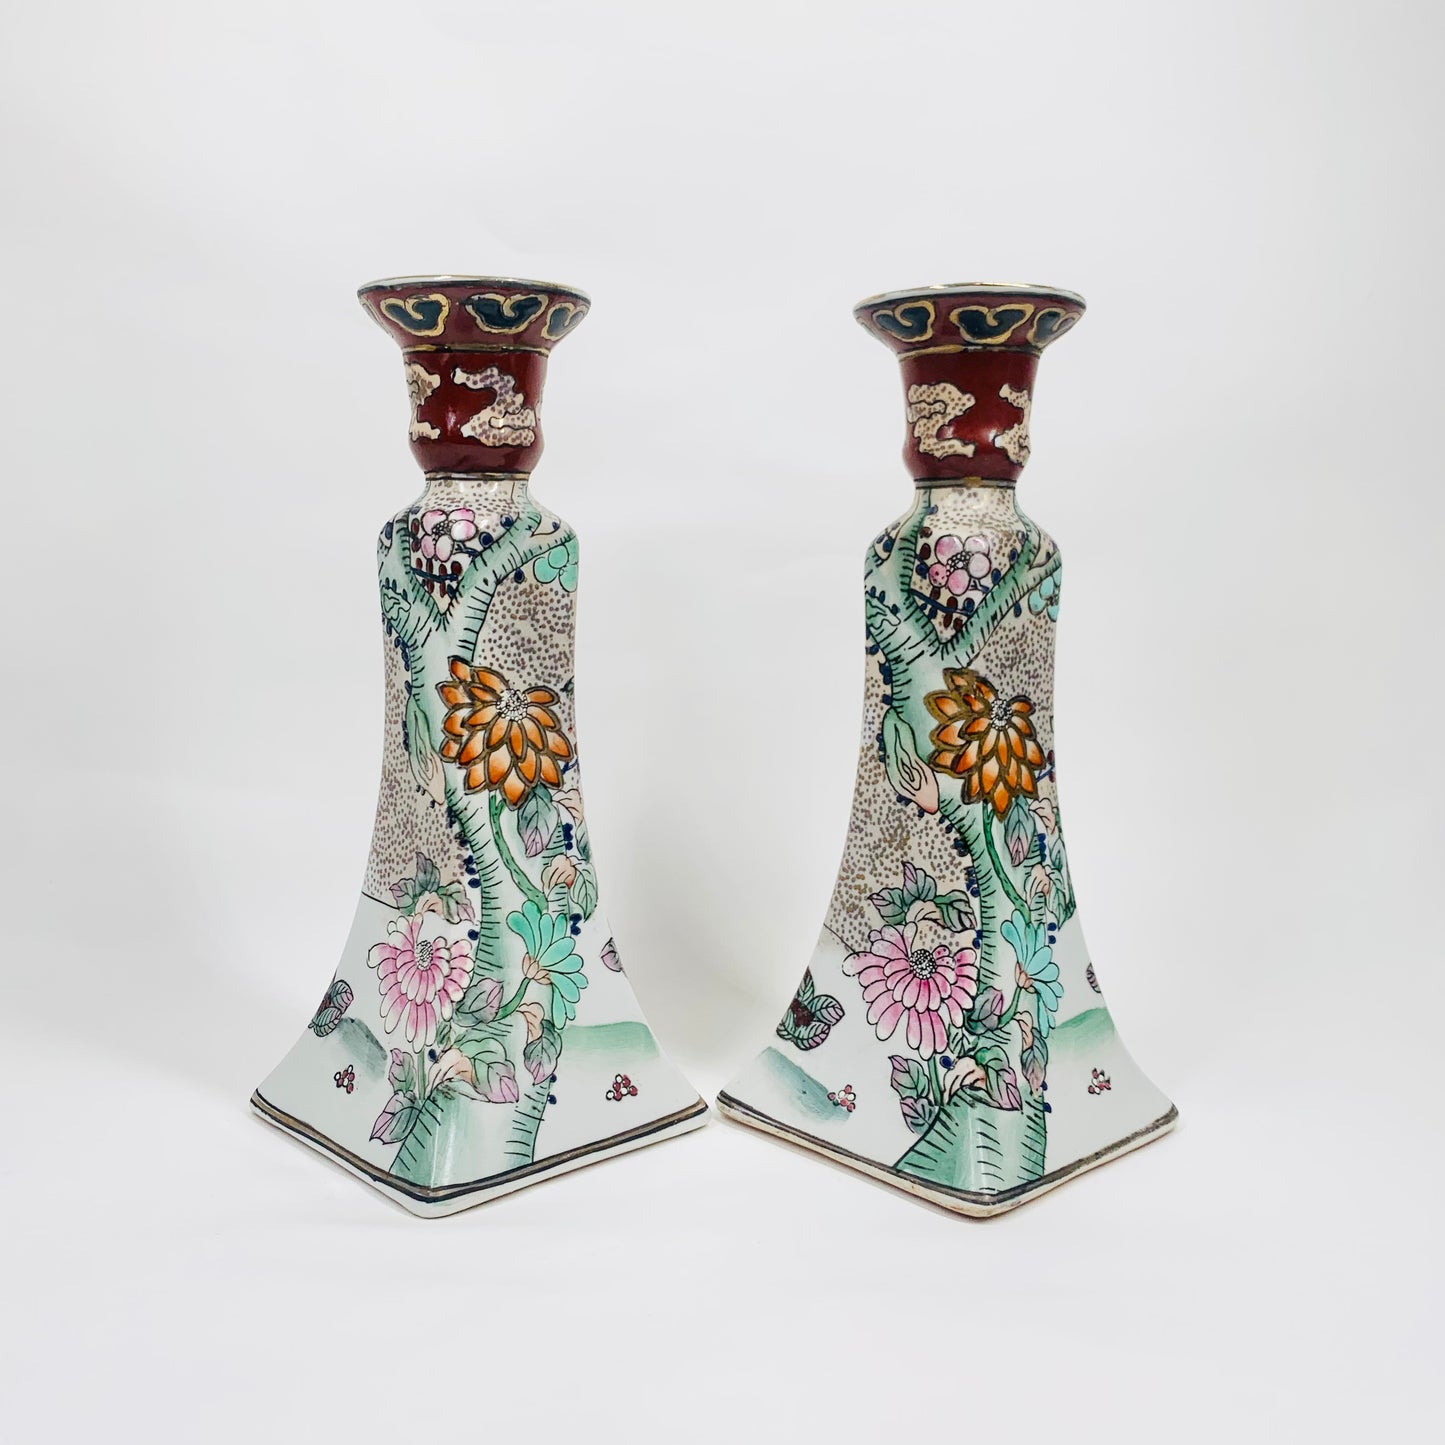 Extremely rare antique pair of Chinese hand painted porcelain candle holders